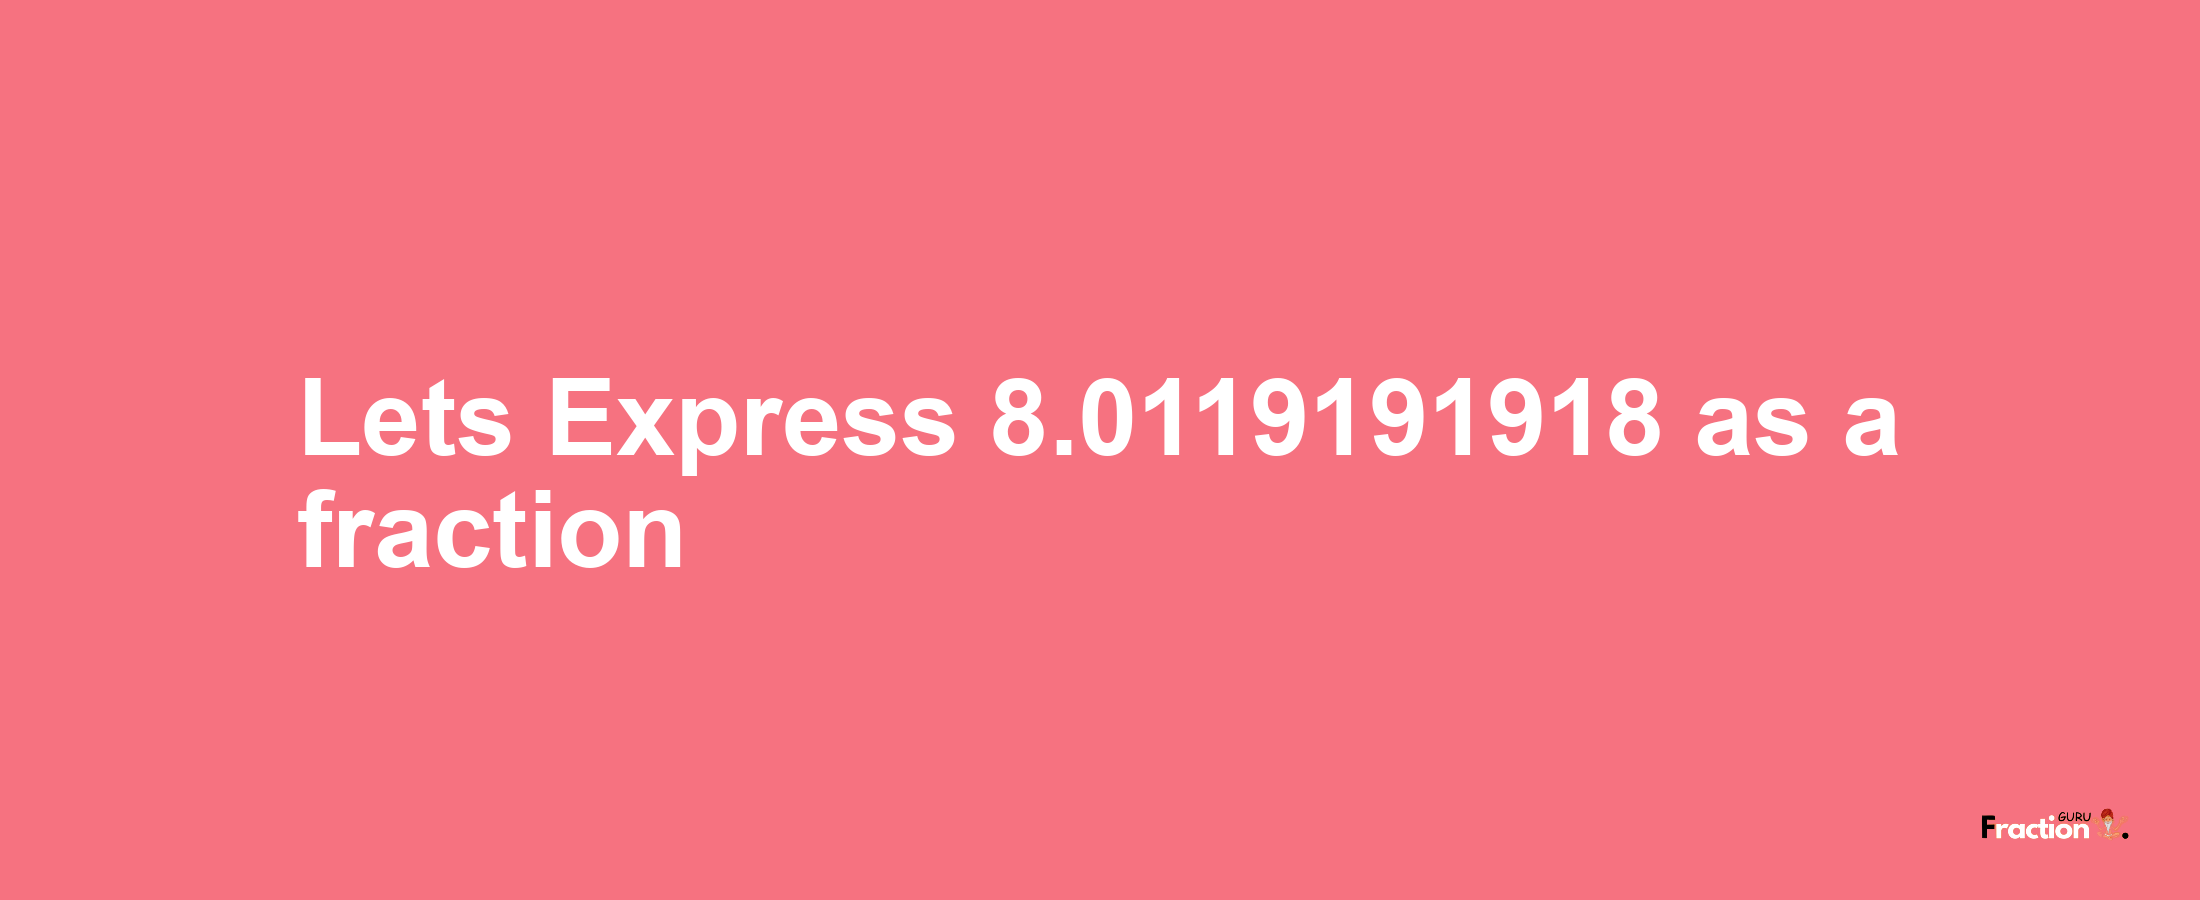 Lets Express 8.0119191918 as afraction